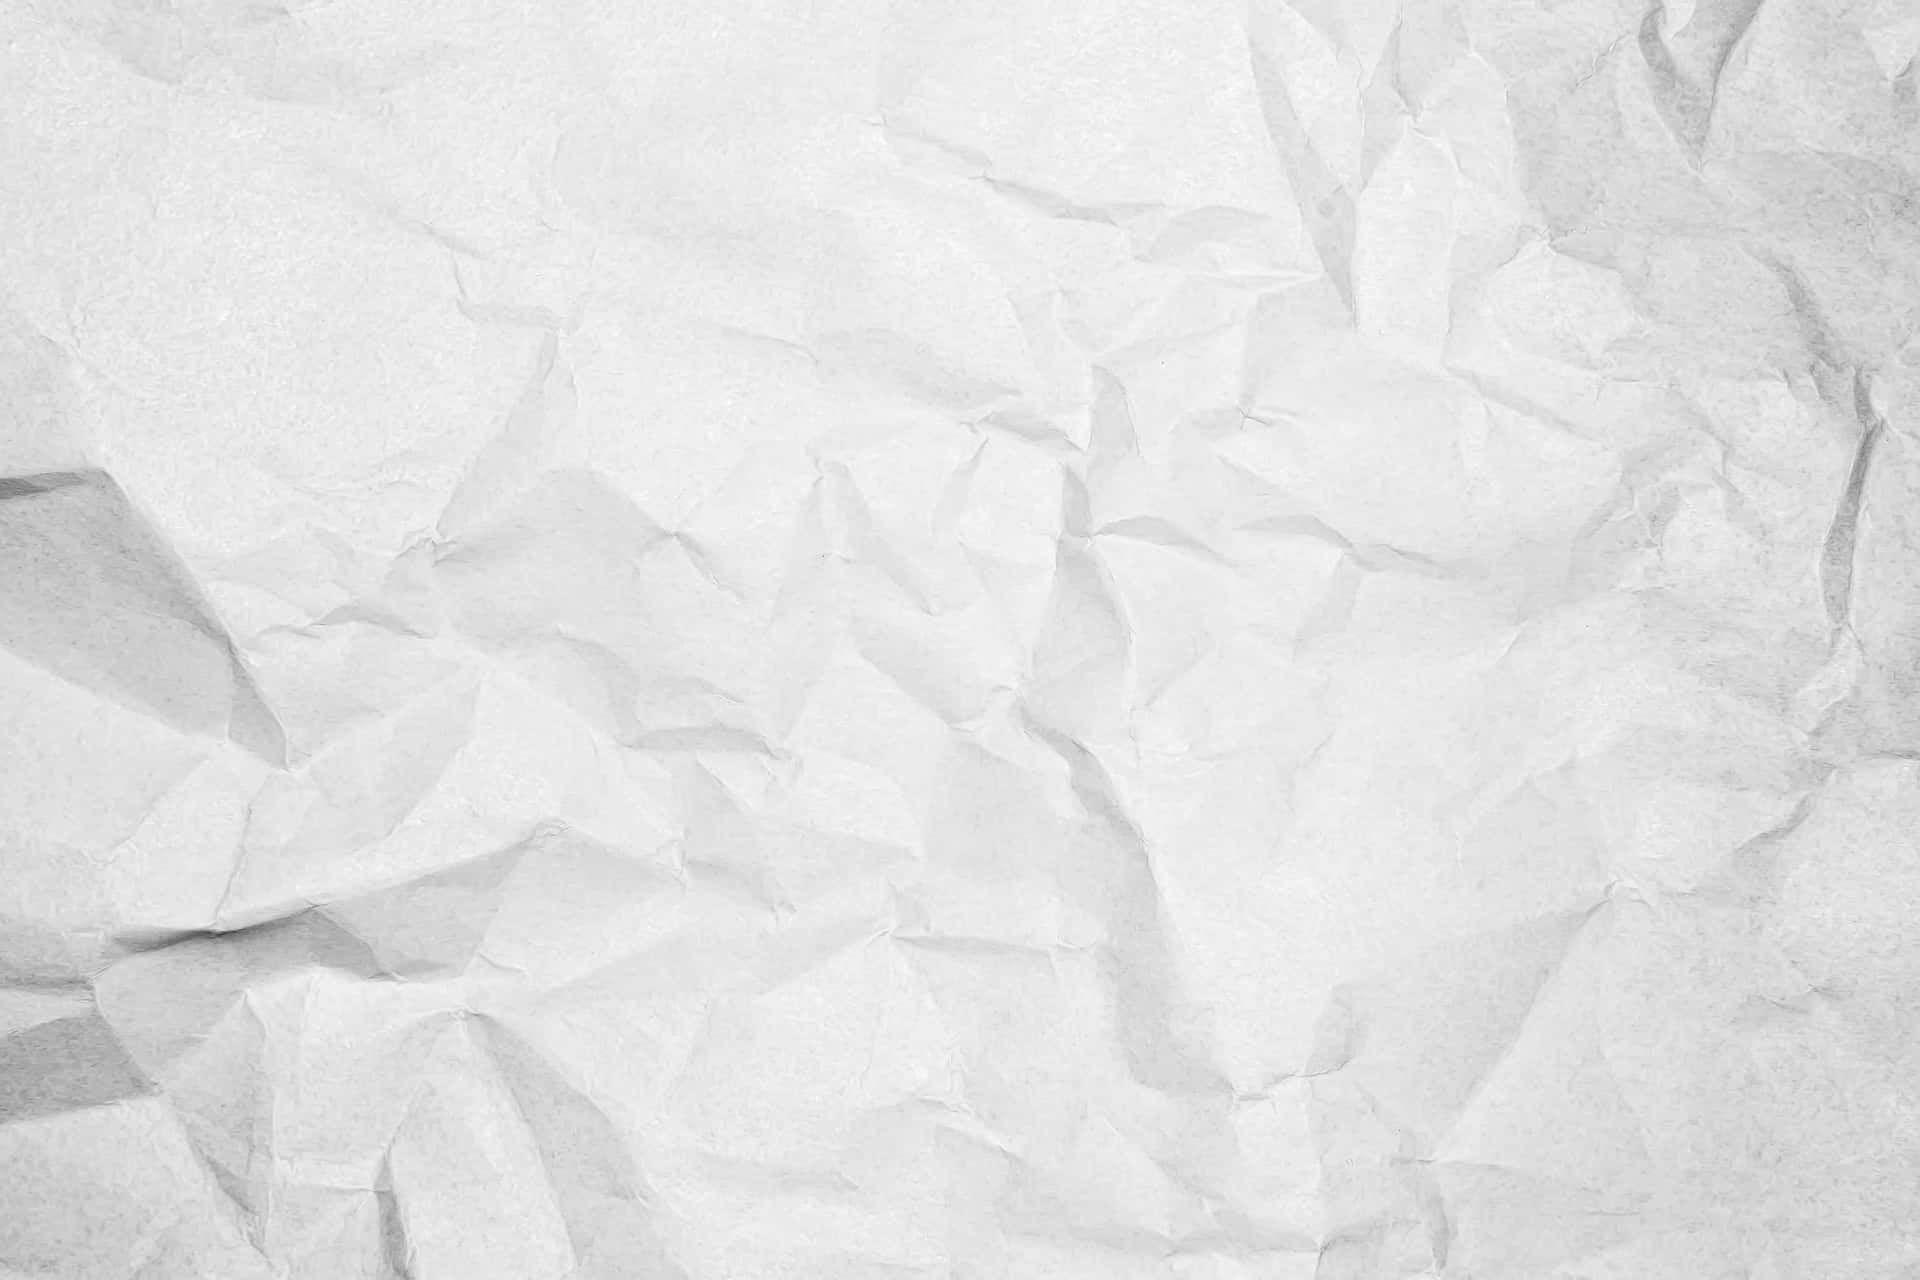 200+] Paper Texture Backgrounds